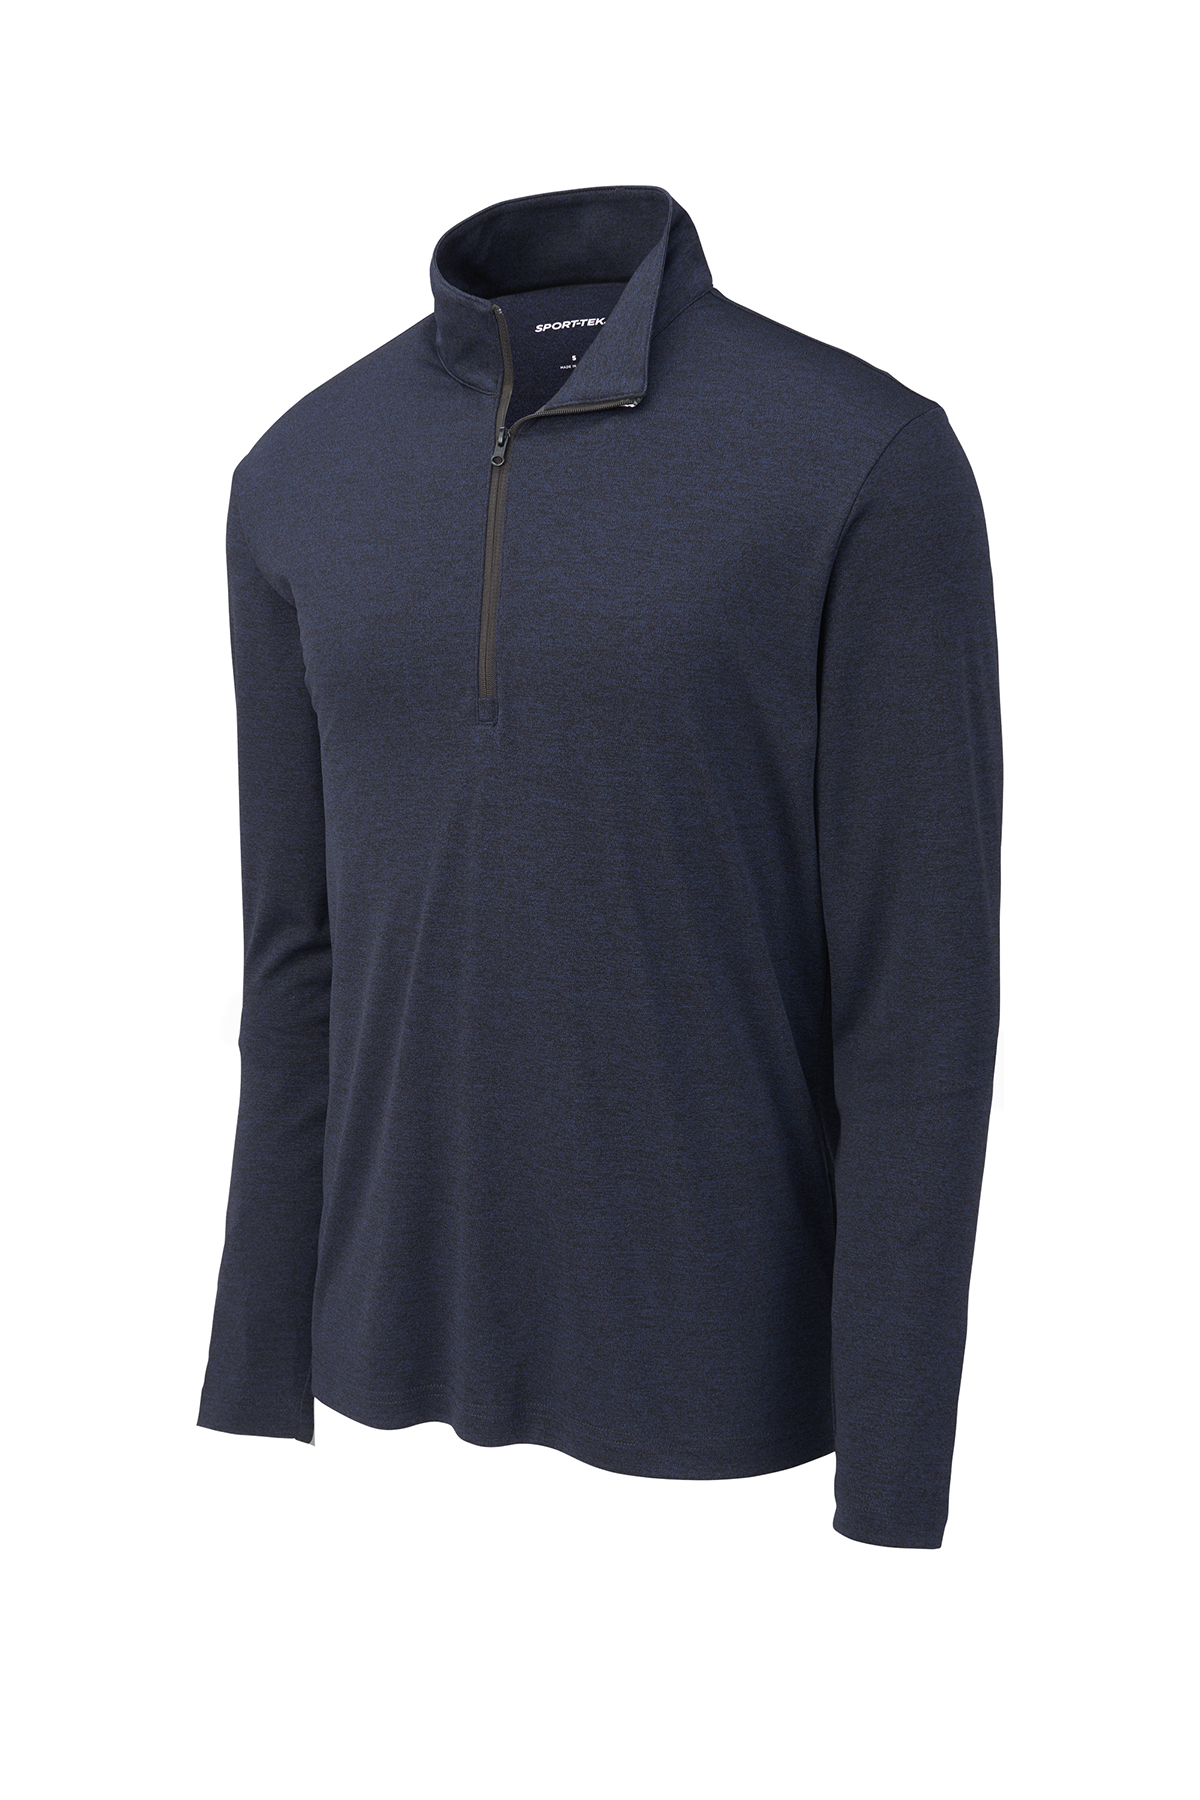 click to view Deep Navy Heather